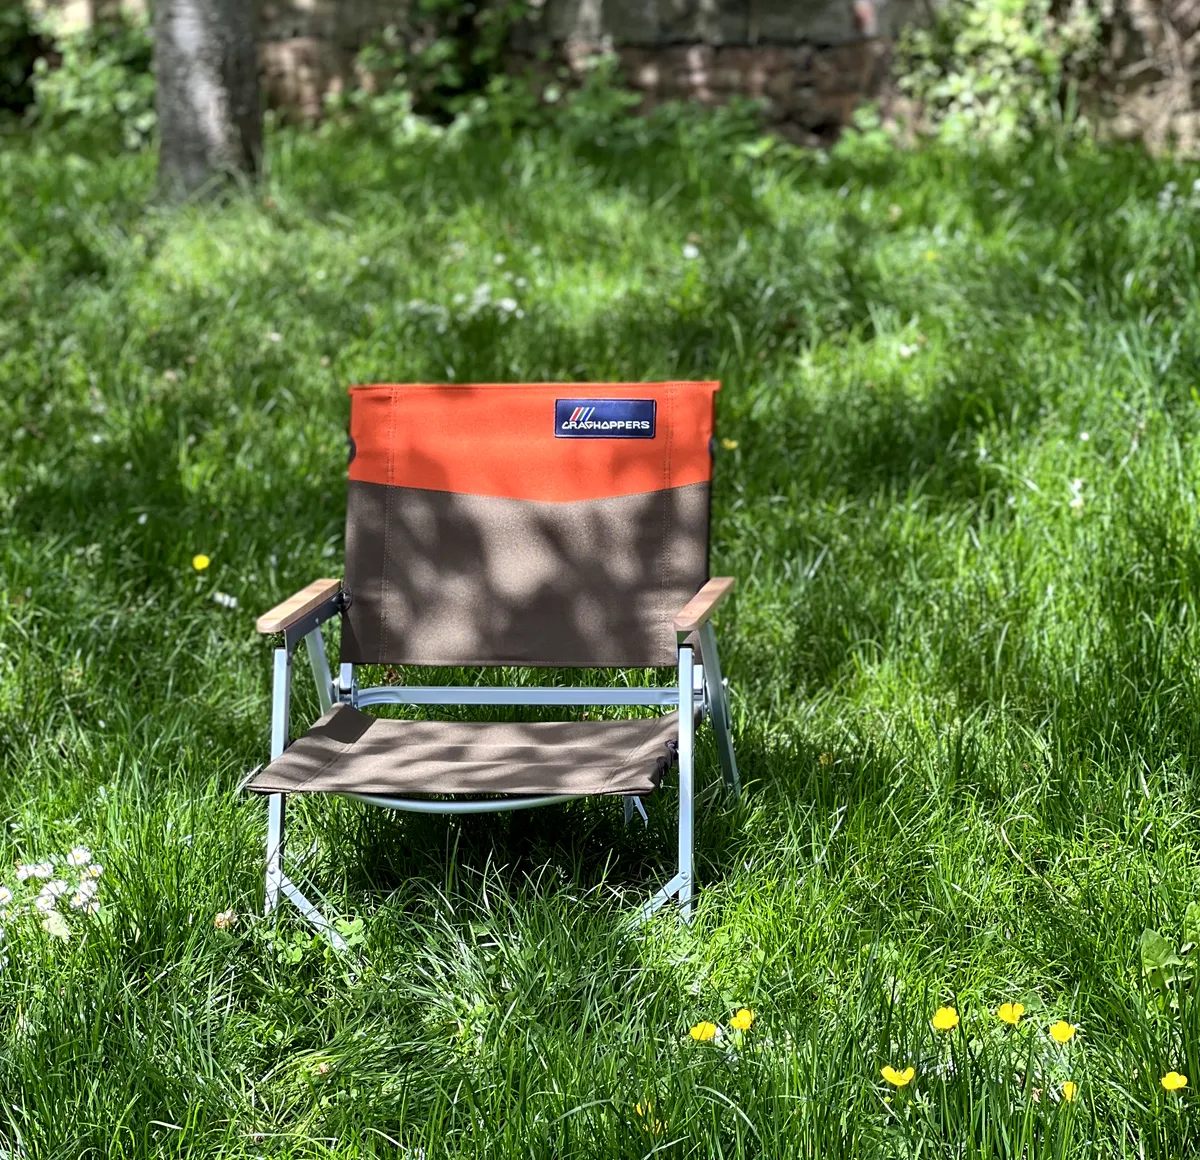 Craghoppers camping chair outdoors on grass